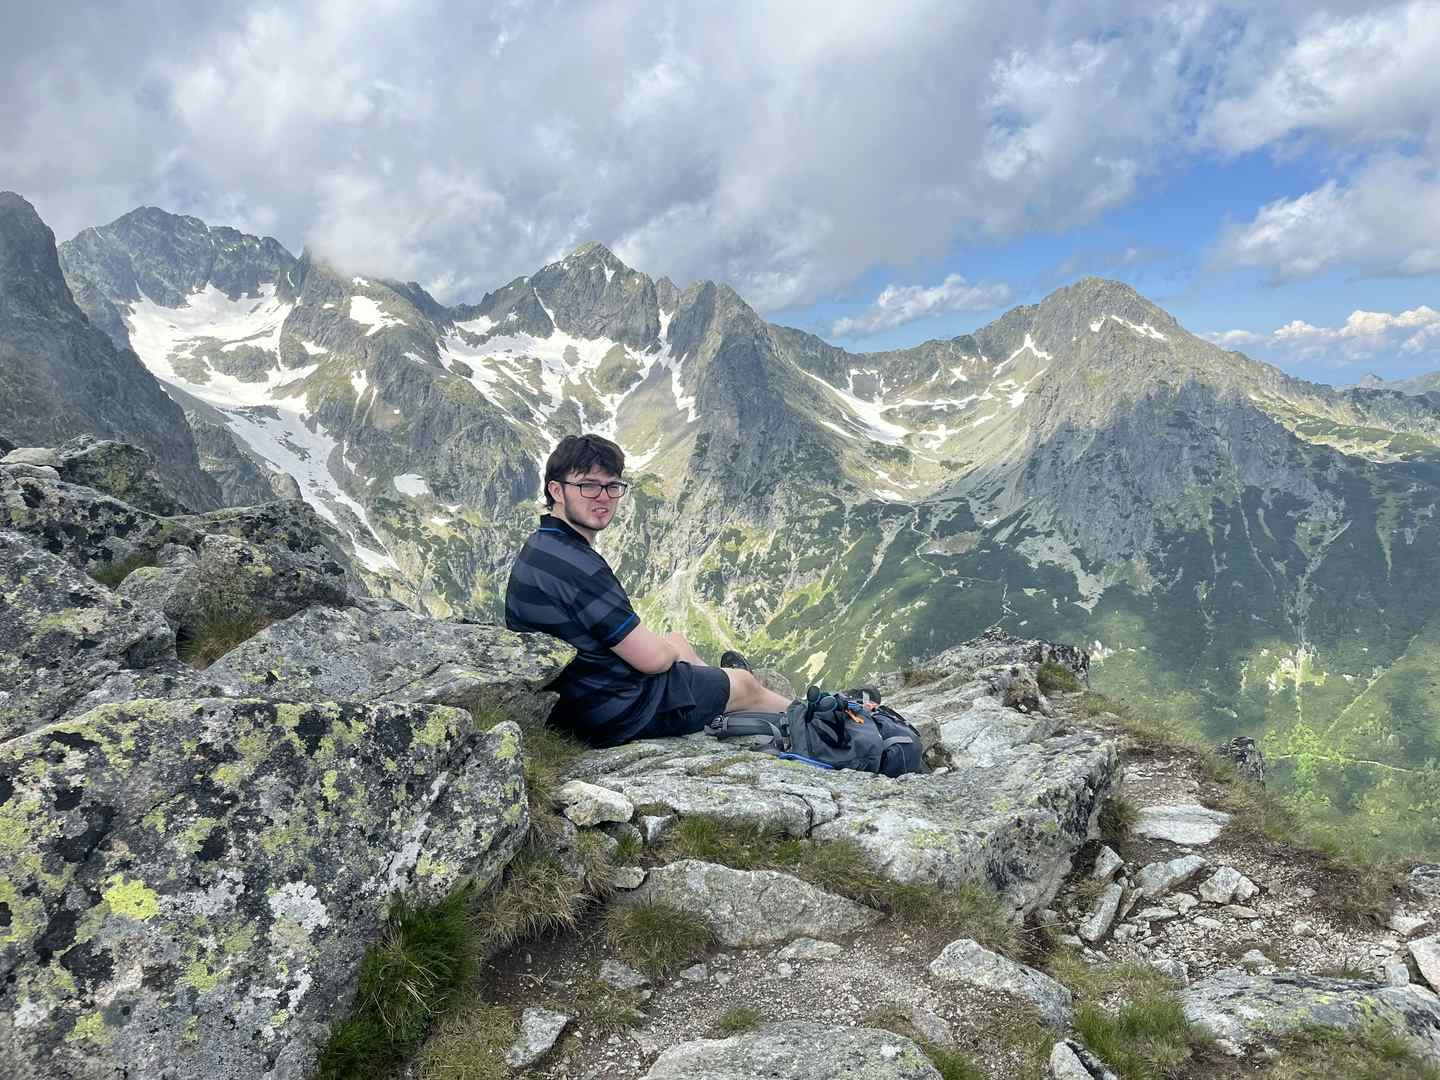 High Tatras - Incredible scenery, guide and company